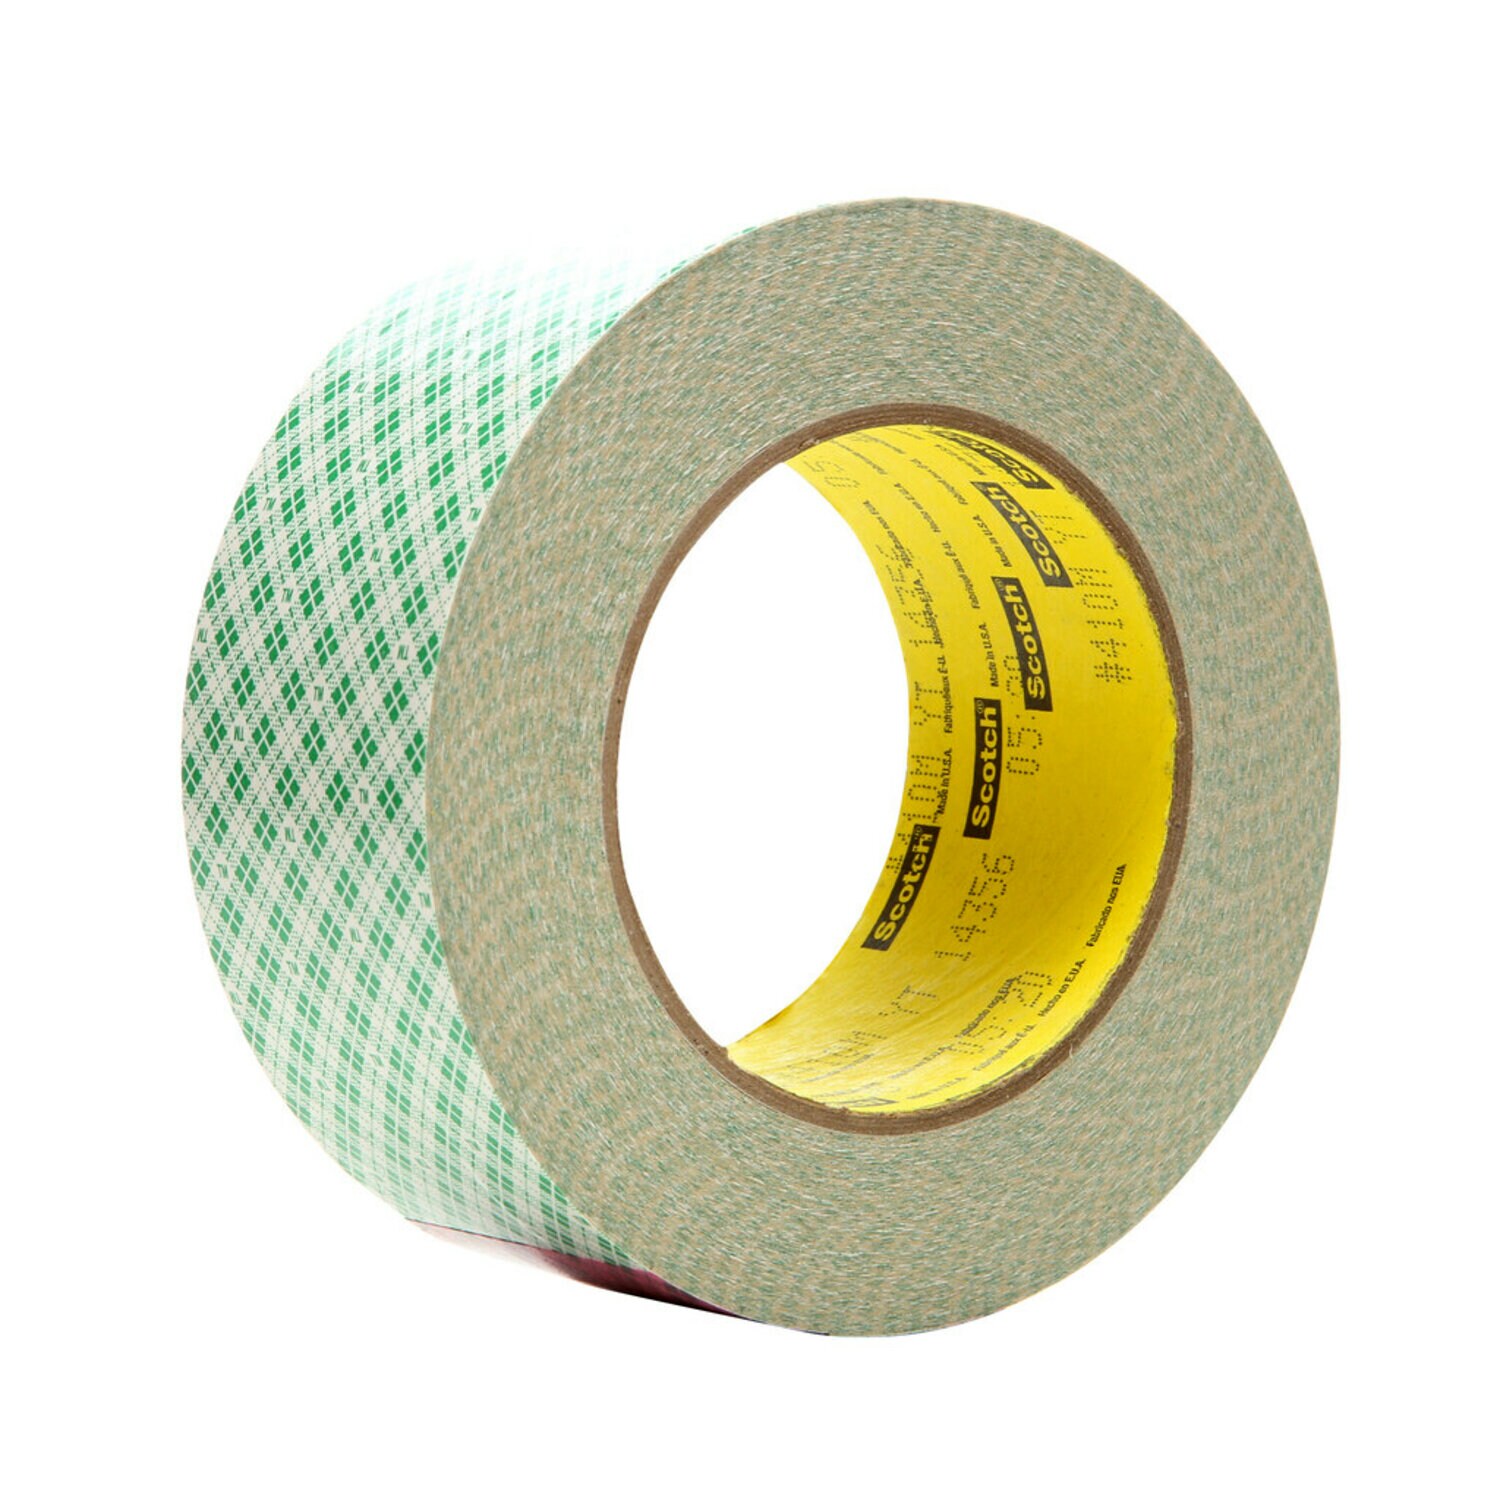 Reli. Painter's Tape, Blue | 1 x 55 Yards (1,430 Yards Total) | 26 Rolls - Bulk | Blue Tape/Painters Tape 1 inch | Paint Tape for Walls, Glass